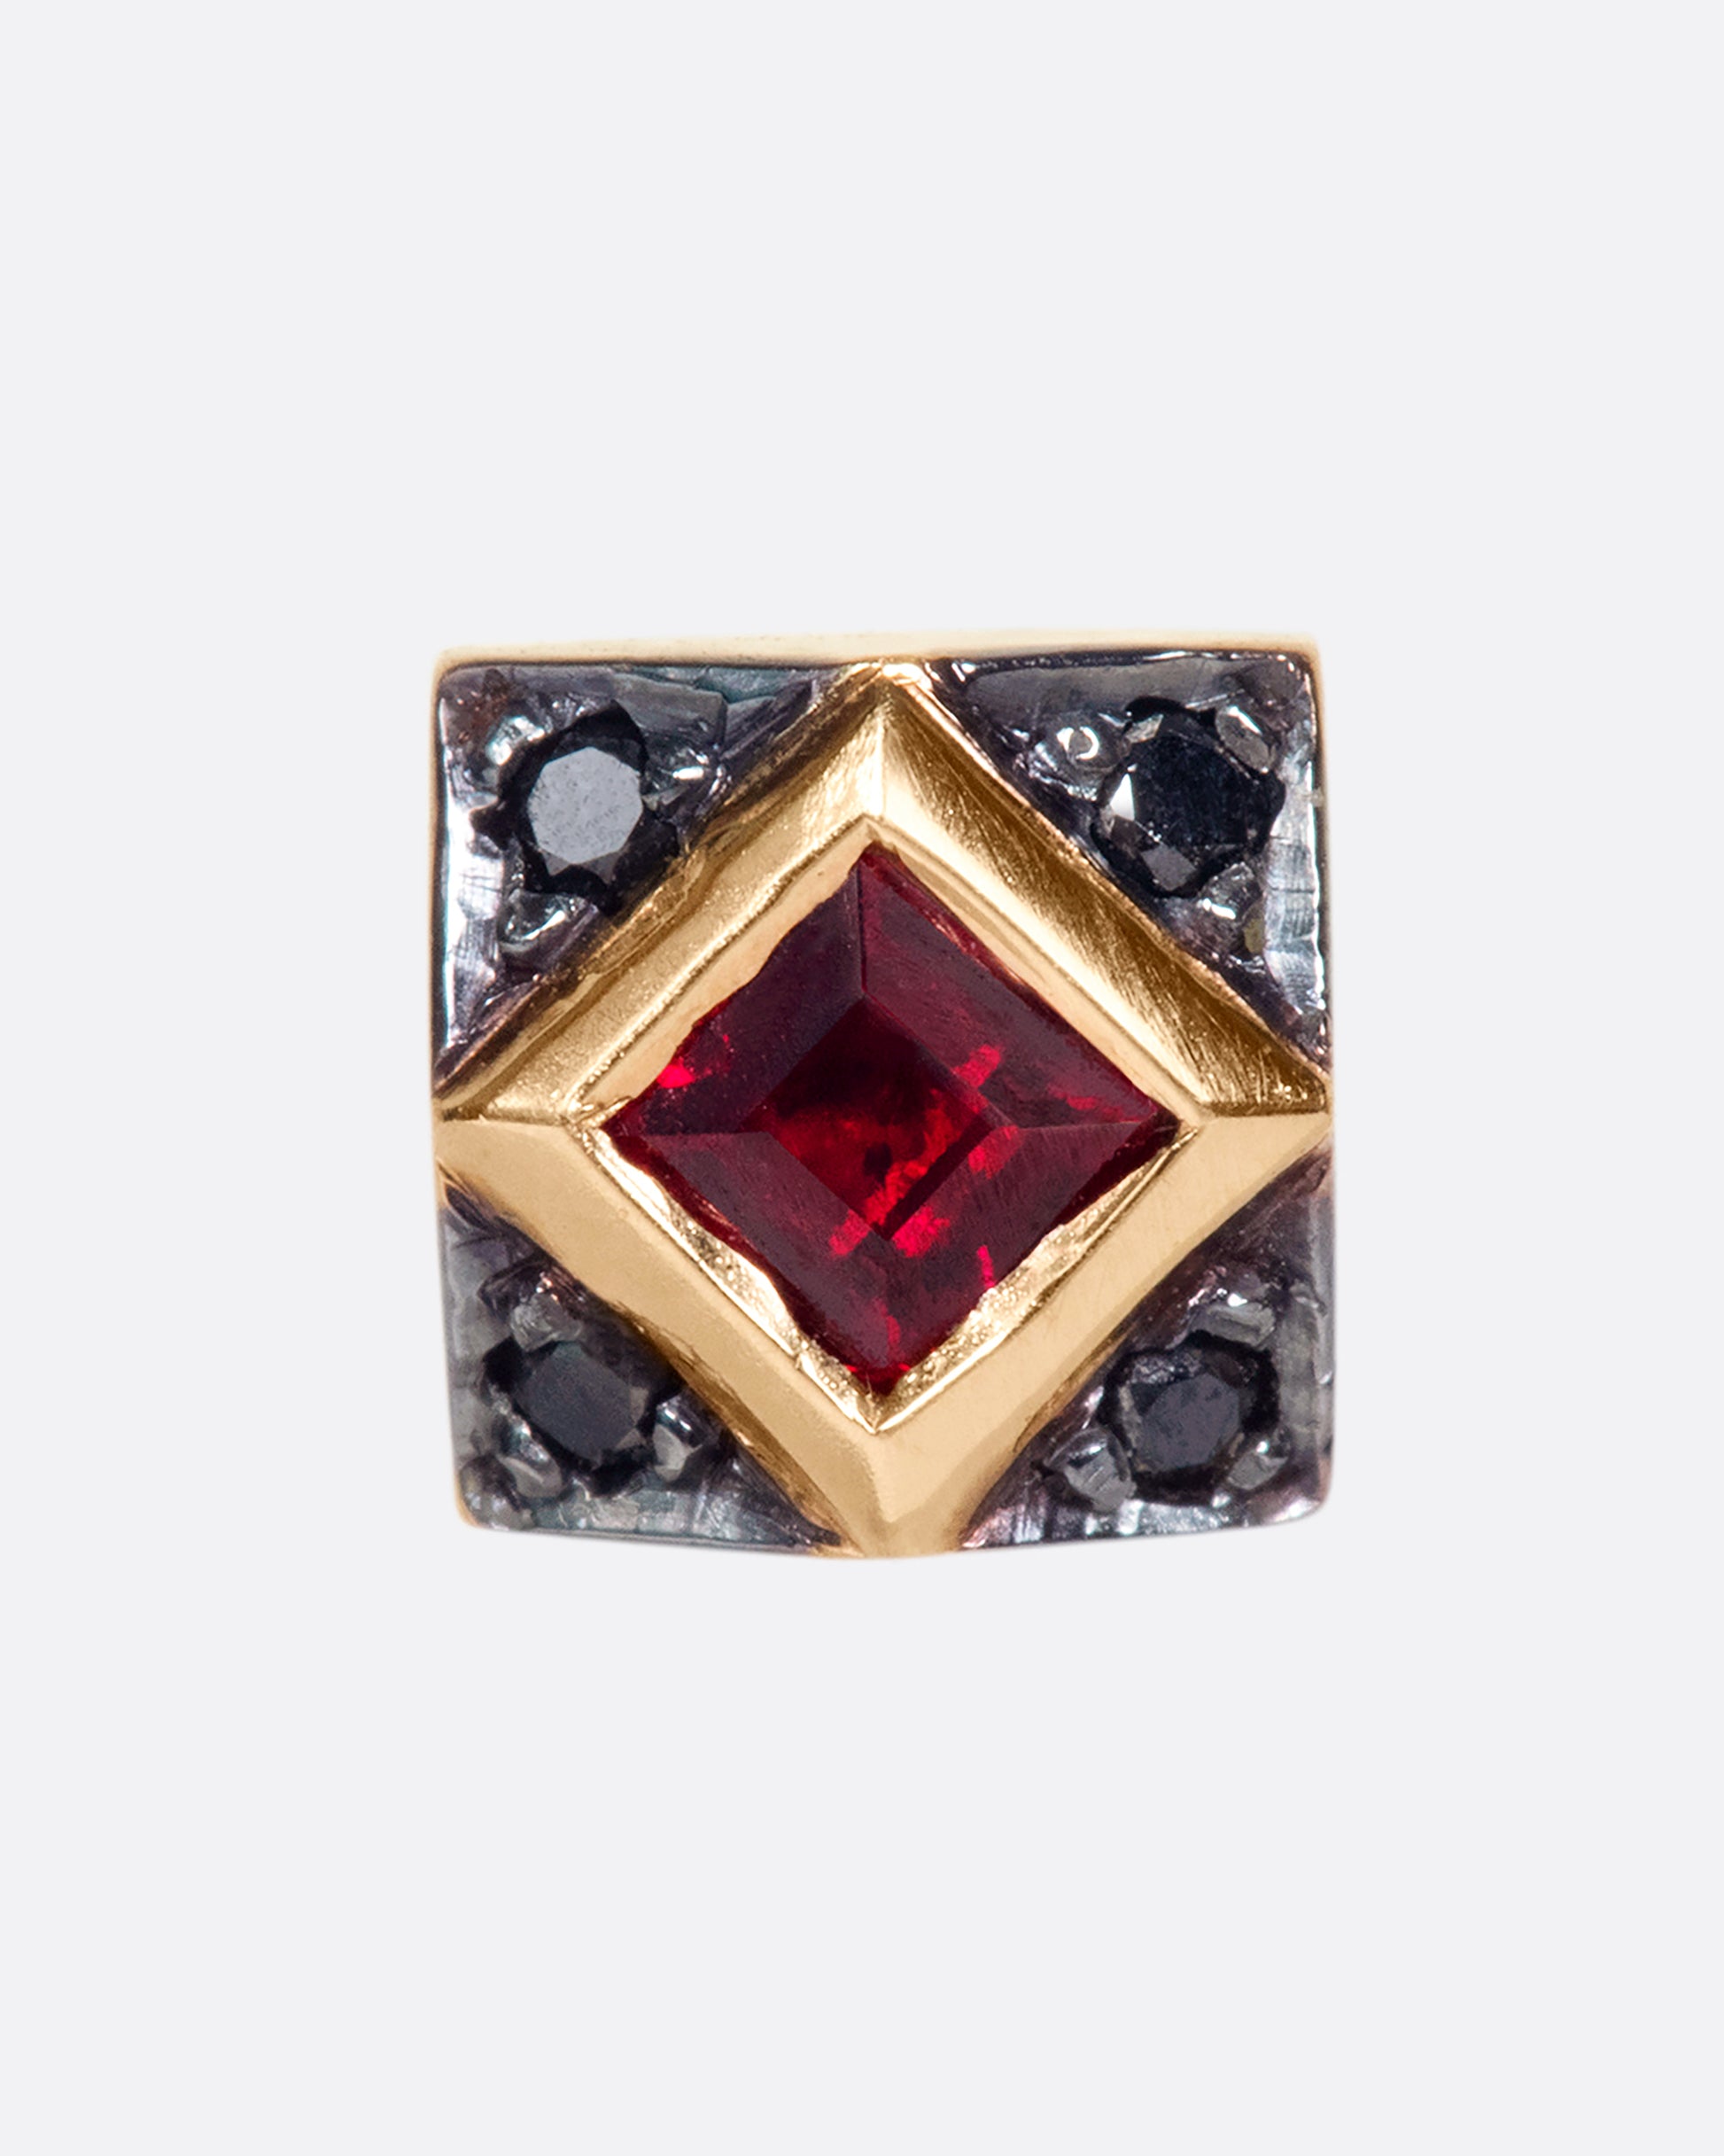 A 14k rose gold diamond stud featuring a princess cut ruby surrounded by four black diamonds